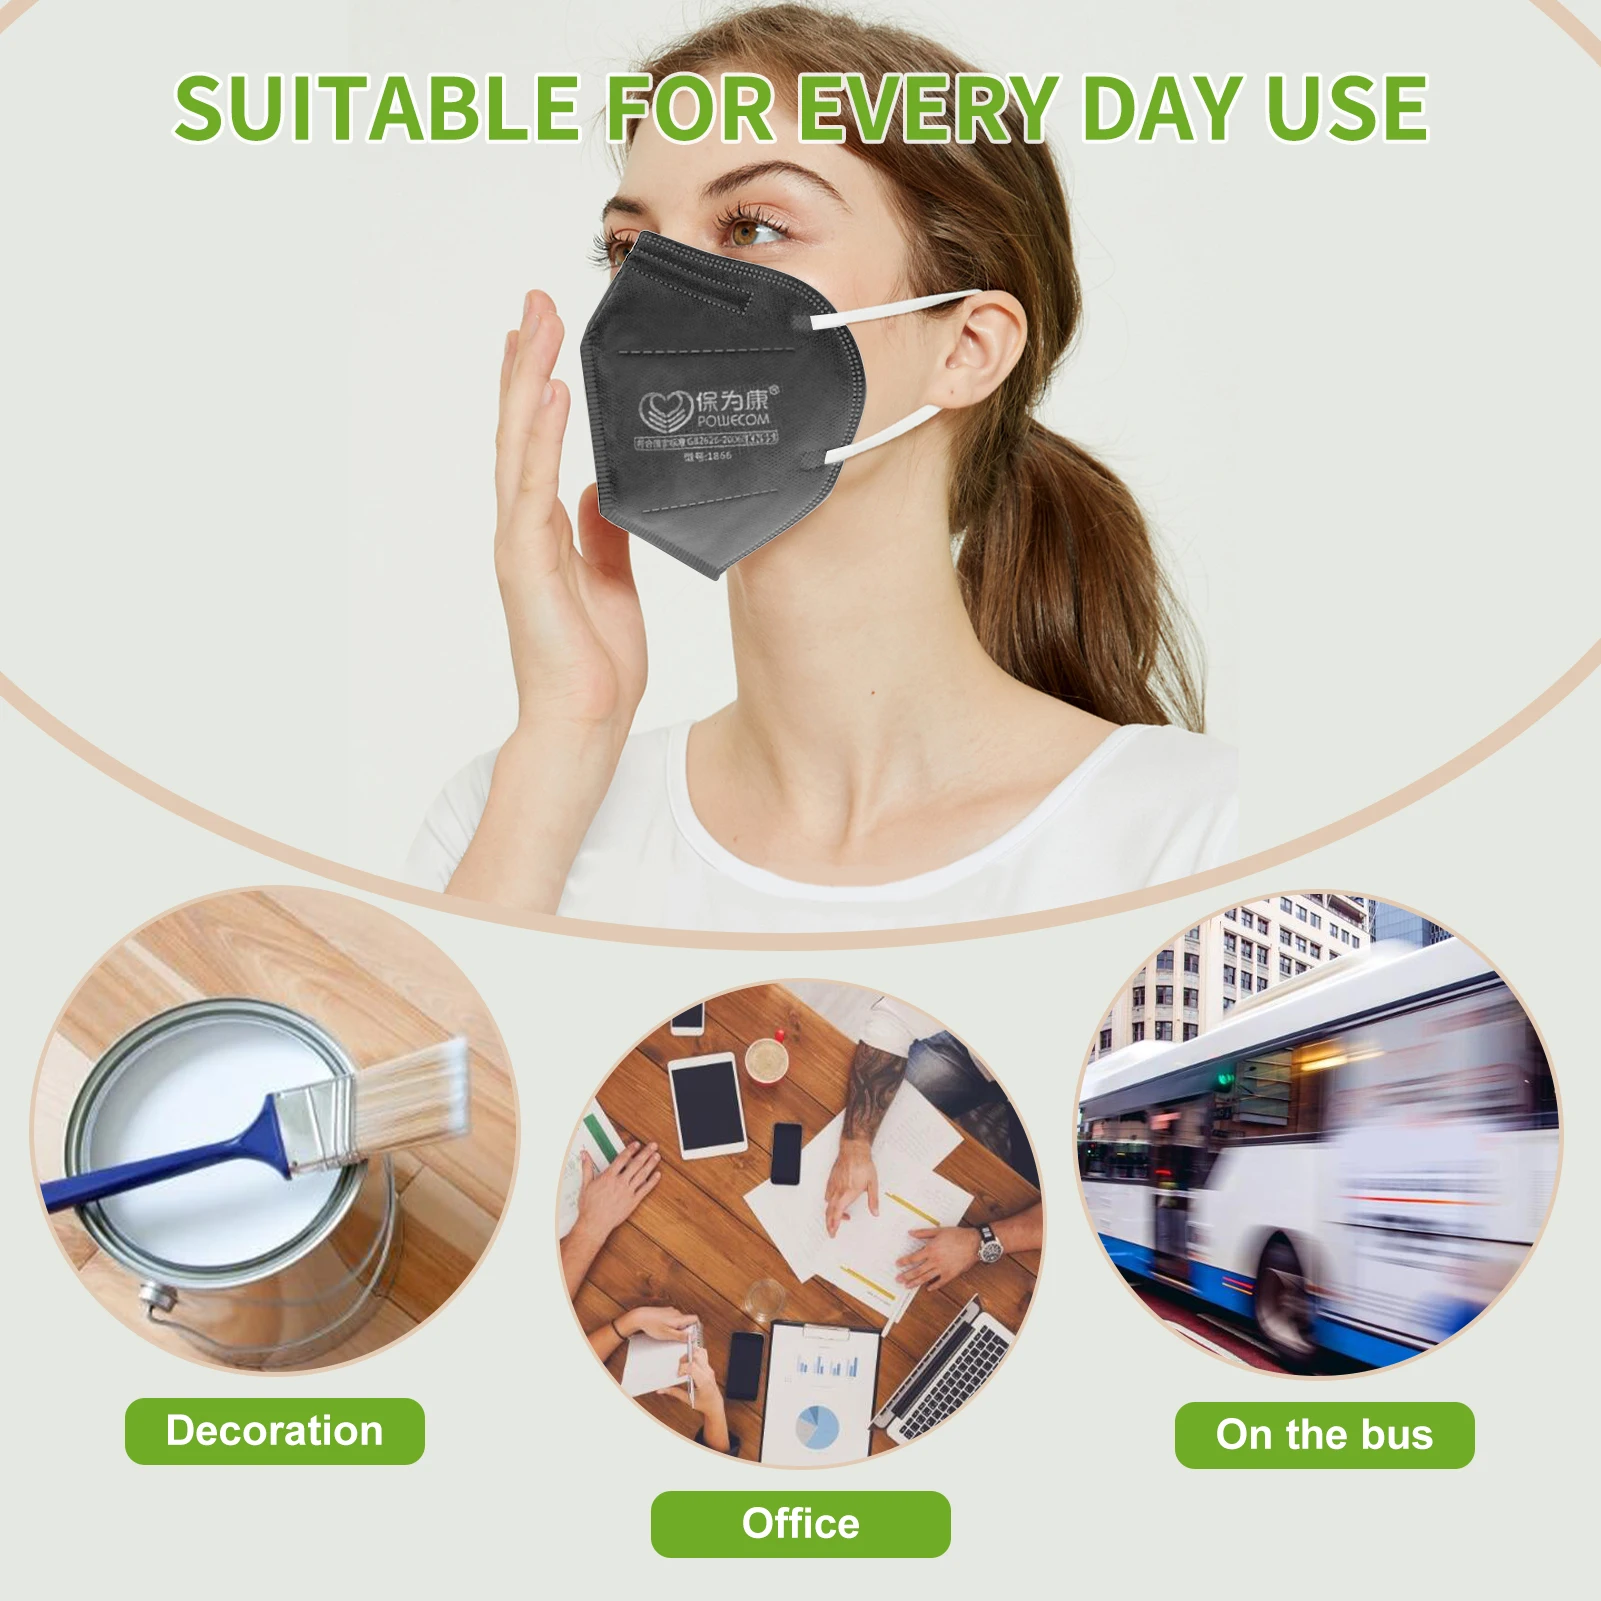 

FFP2mask Powecom Reusable FFP2 Masks PM2.5 Protective 95% Filtration FFP2 Mouth Muffle Mask Face Mask Respirator with CE